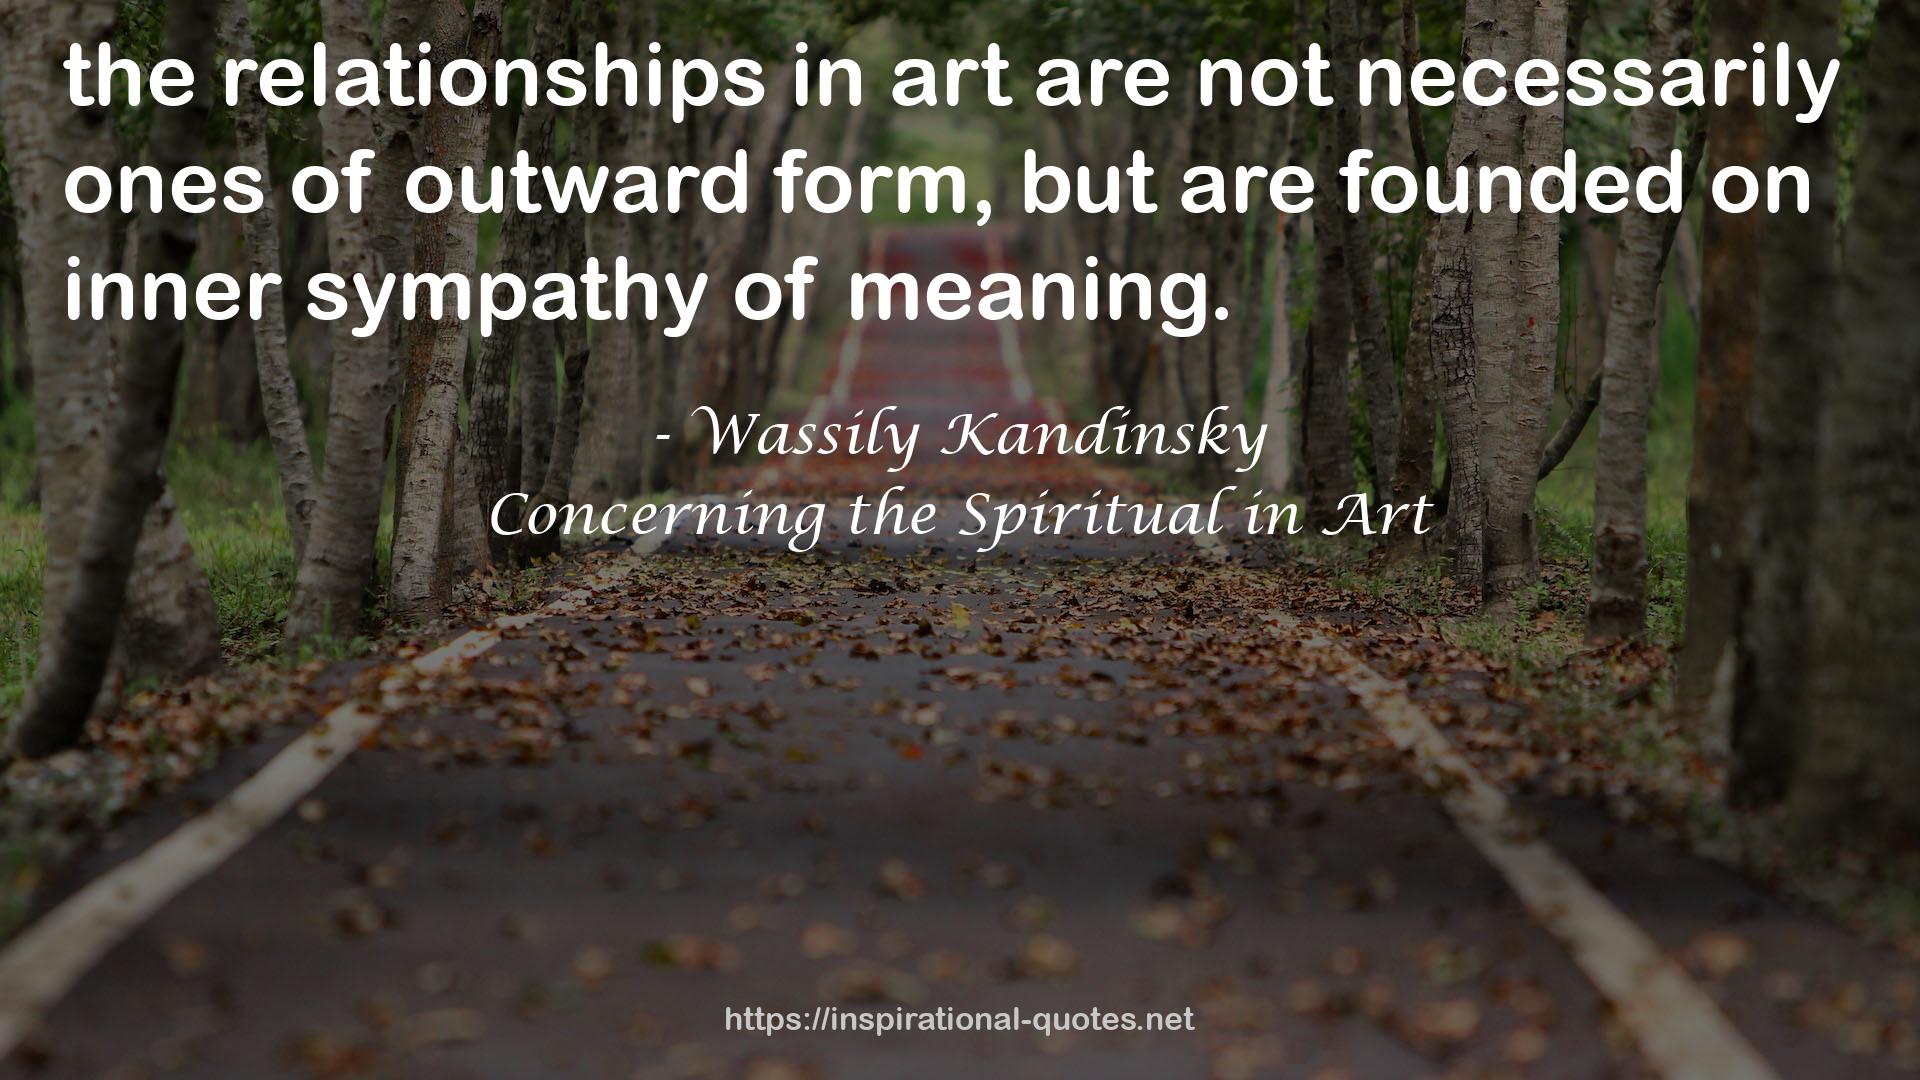 Concerning the Spiritual in Art QUOTES